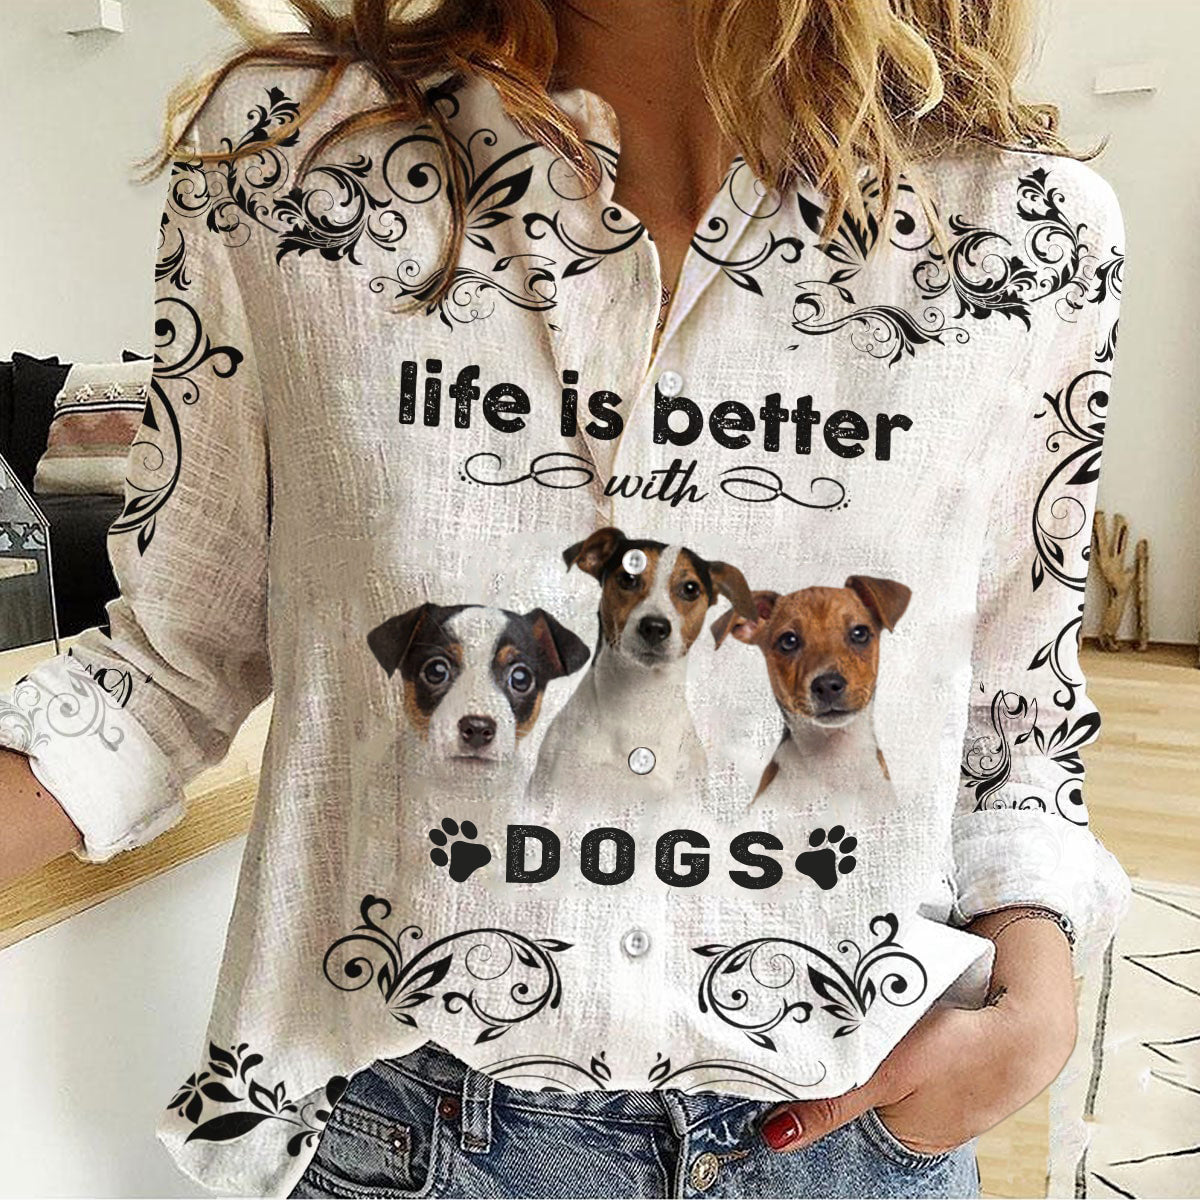 Jack Russell Terrier -Life Is Better With Dogs Women's Long-Sleeve Shirt